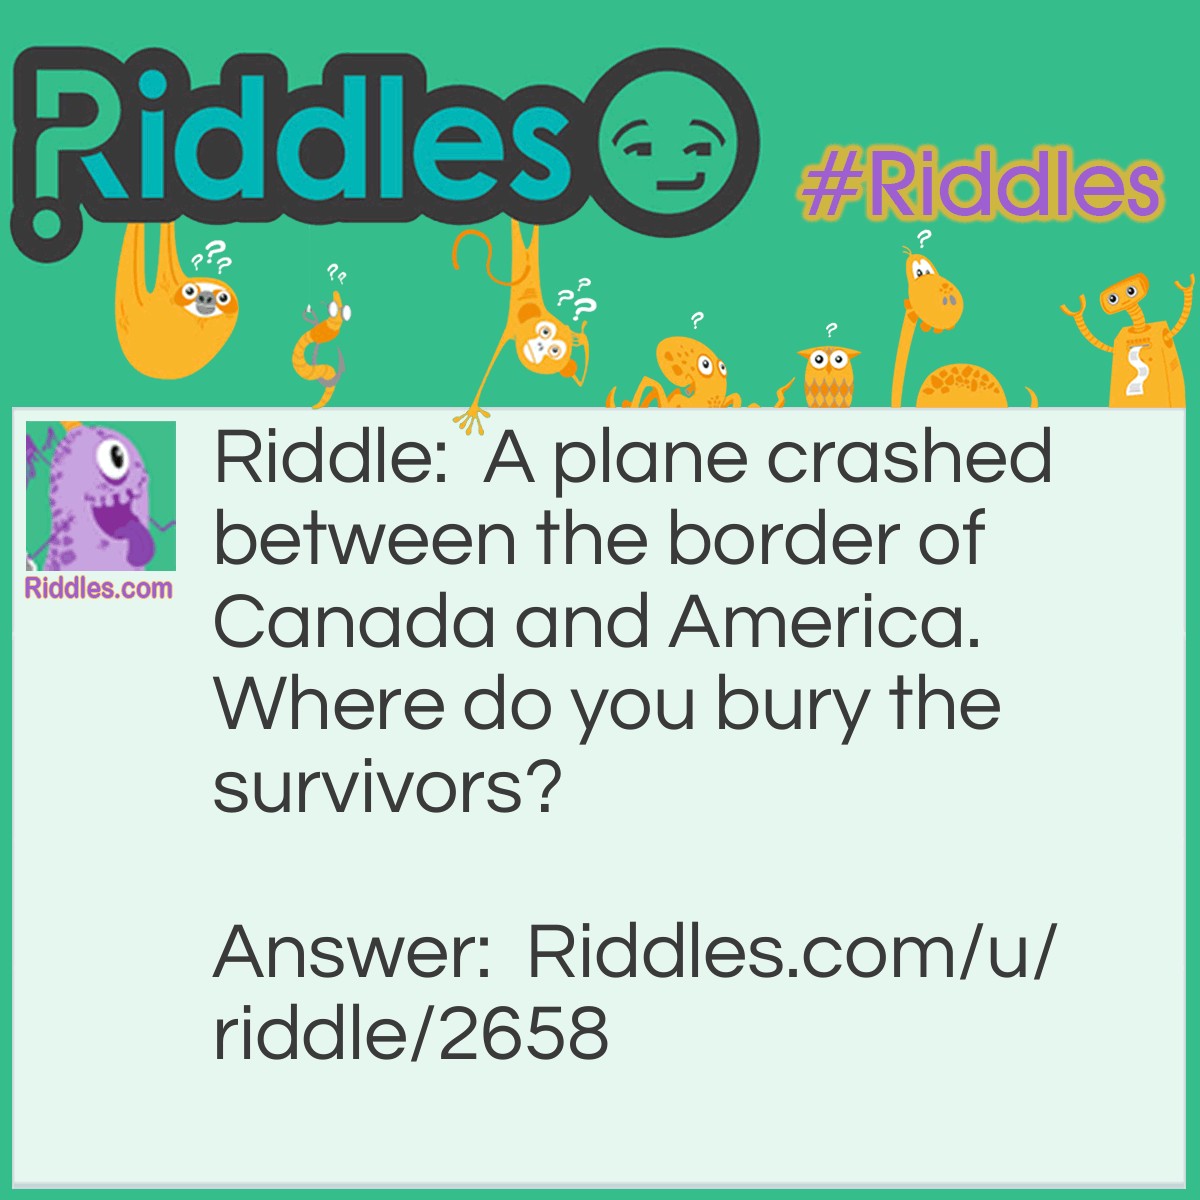 Riddle: A plane crashed between the border of Canada and America. Where do you bury the survivors? Answer: They are survivors, you don't bury them.